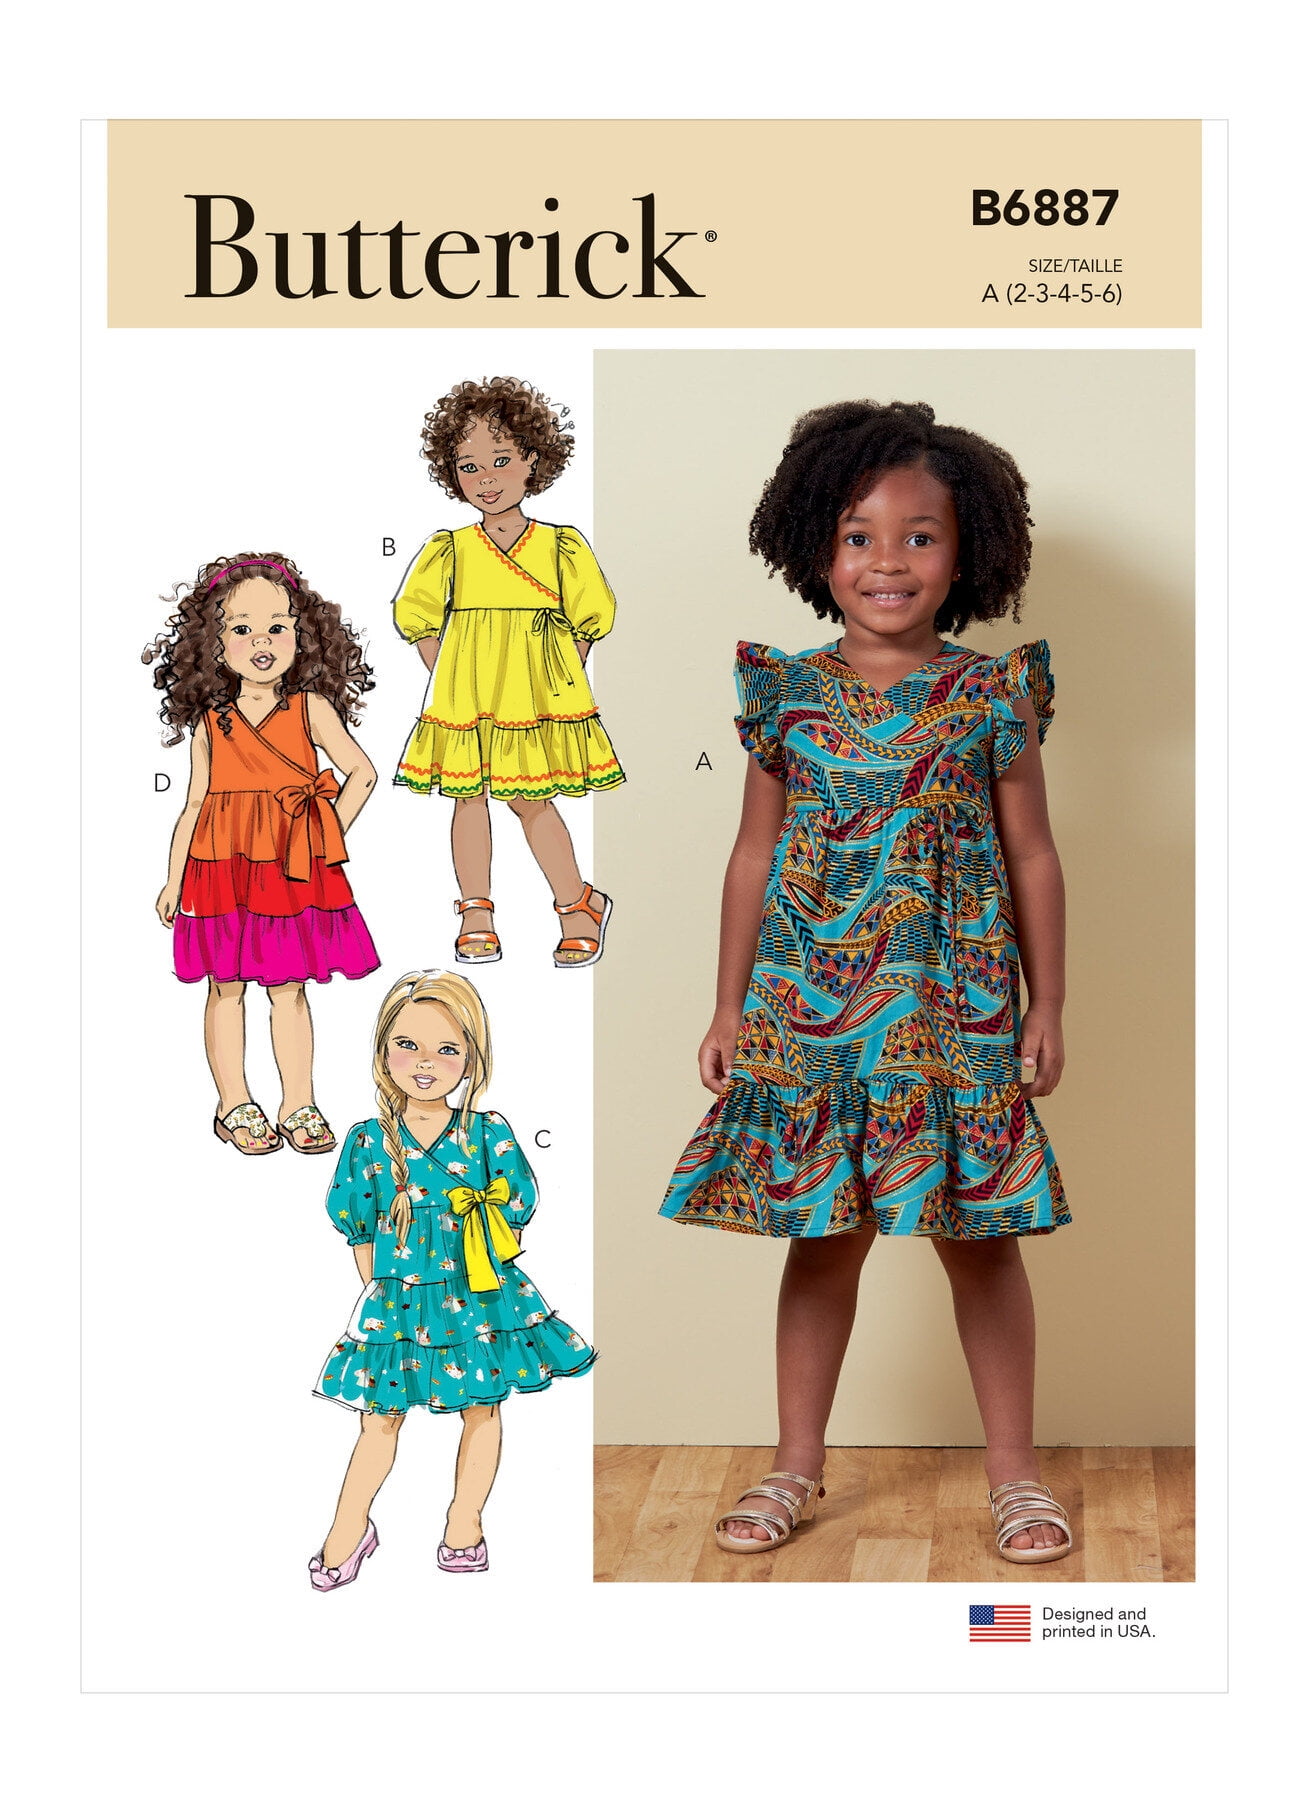 Butterick Kids Clothing Patterns Buy 2 Items Get 25% Off Each Item 